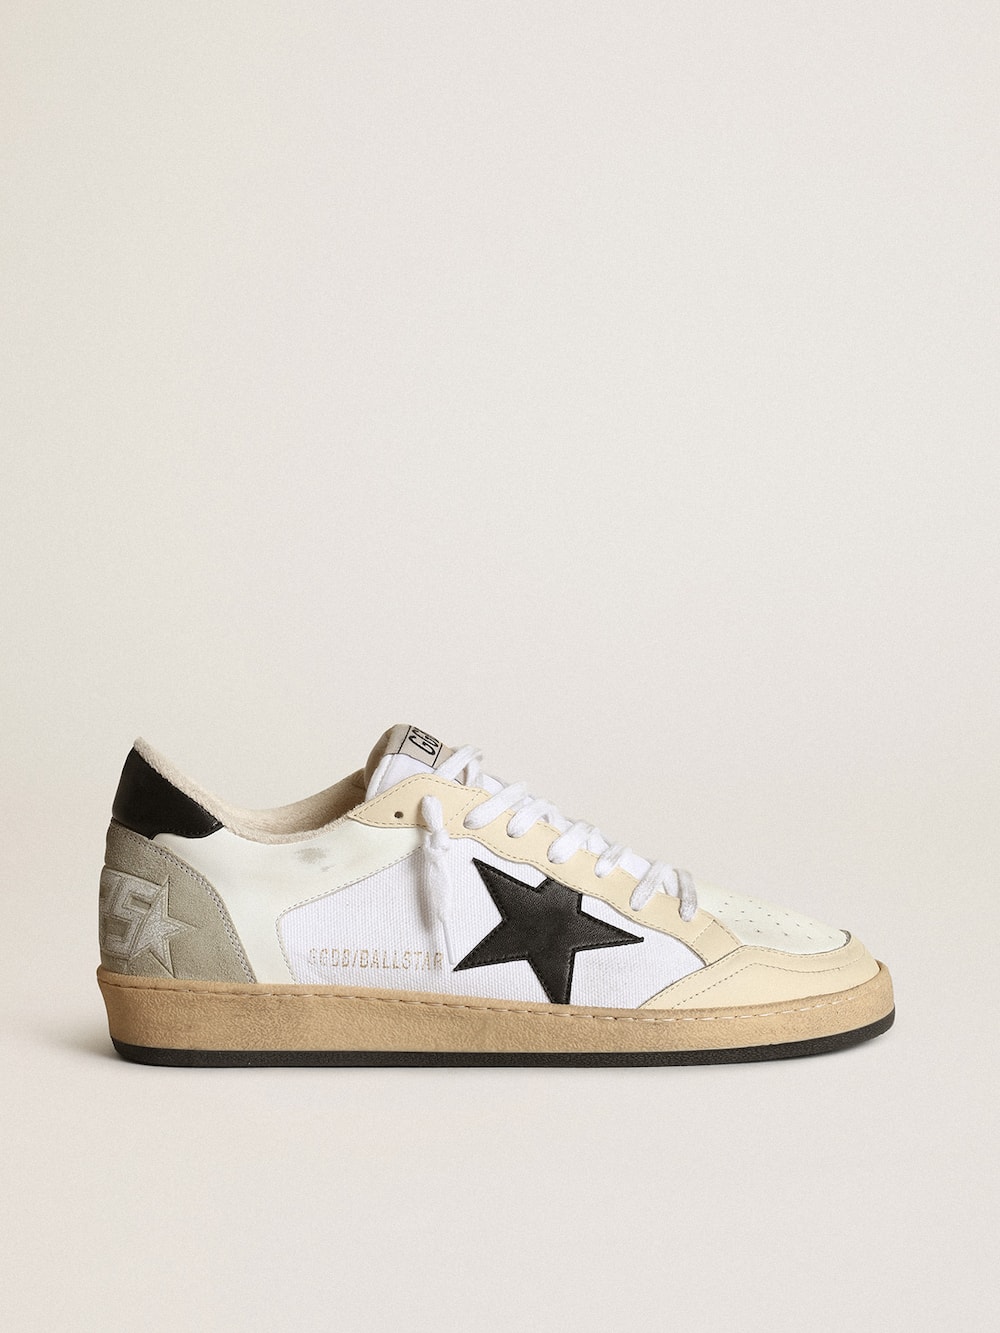 Golden Goose - Men's Ball Star in canvas and white leather with ivory inserts in 